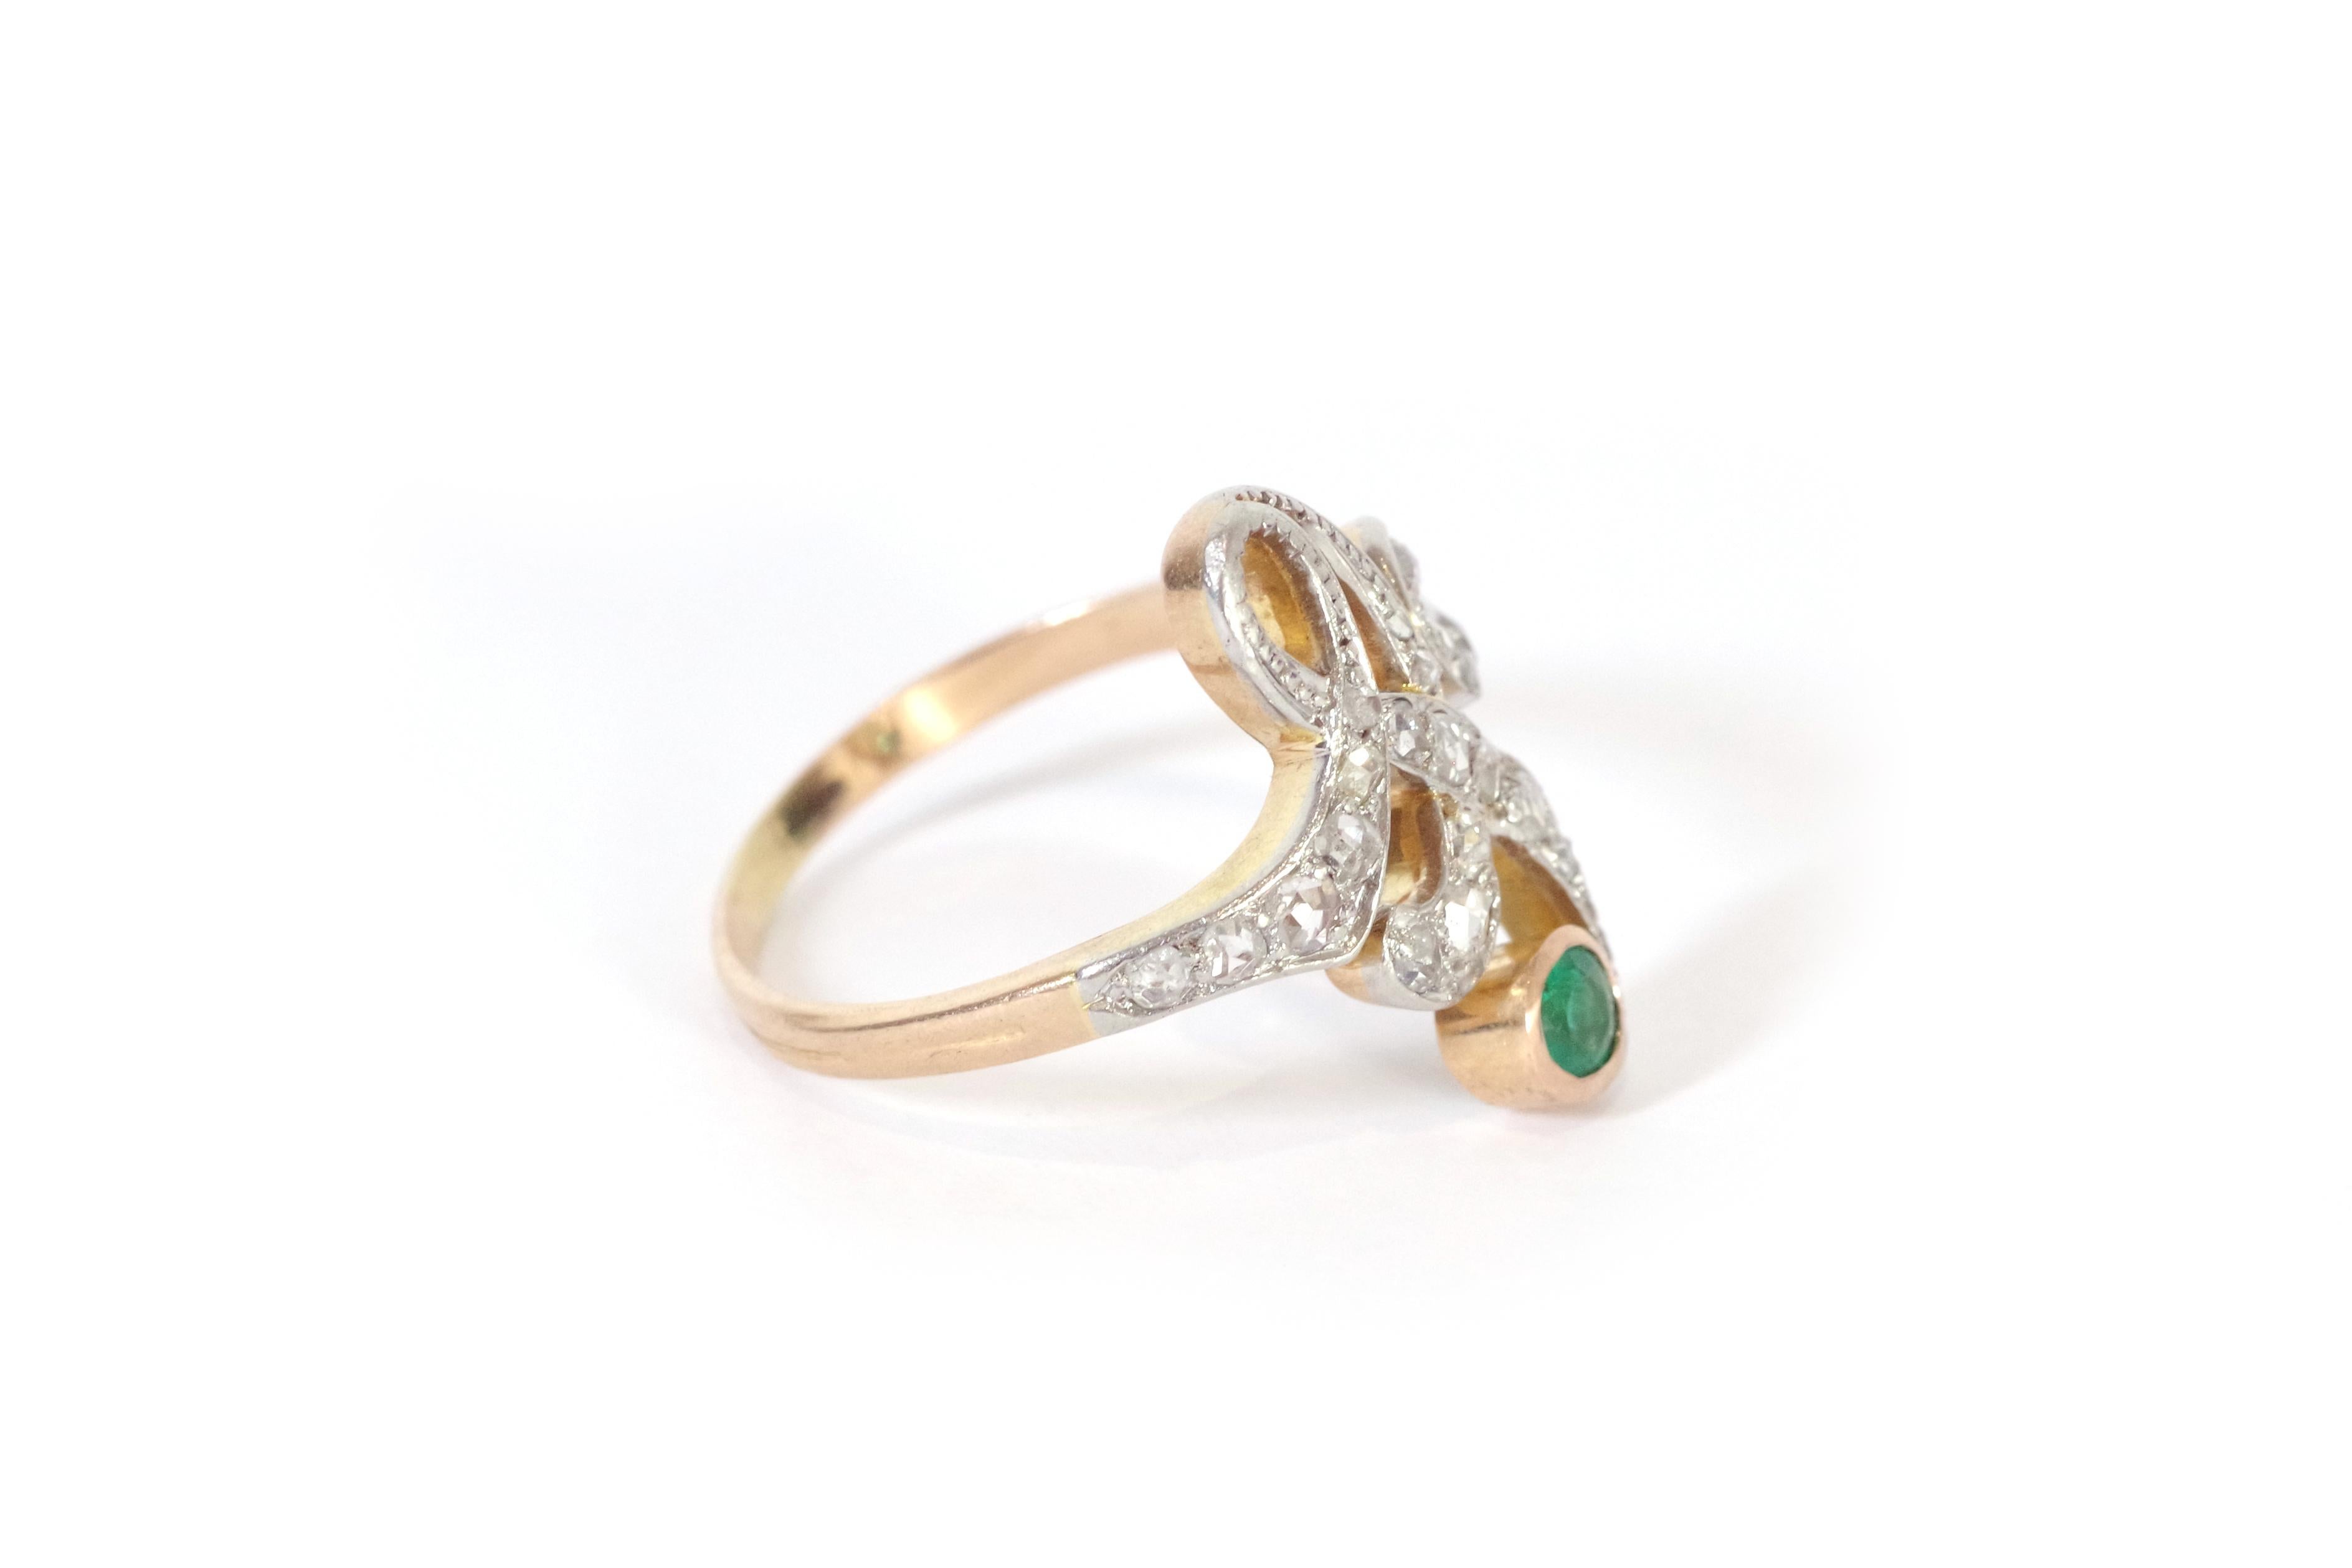 Art Nouveau emerald ring in 18 karat rose gold and platinum. Art Nouveau ring with sinuous lines in platinum, set with 21 rose-cut diamonds and ending with a round emerald in a closed setting. Antique Art Nouveau ring, circa 1910. 

Owl and mascaron